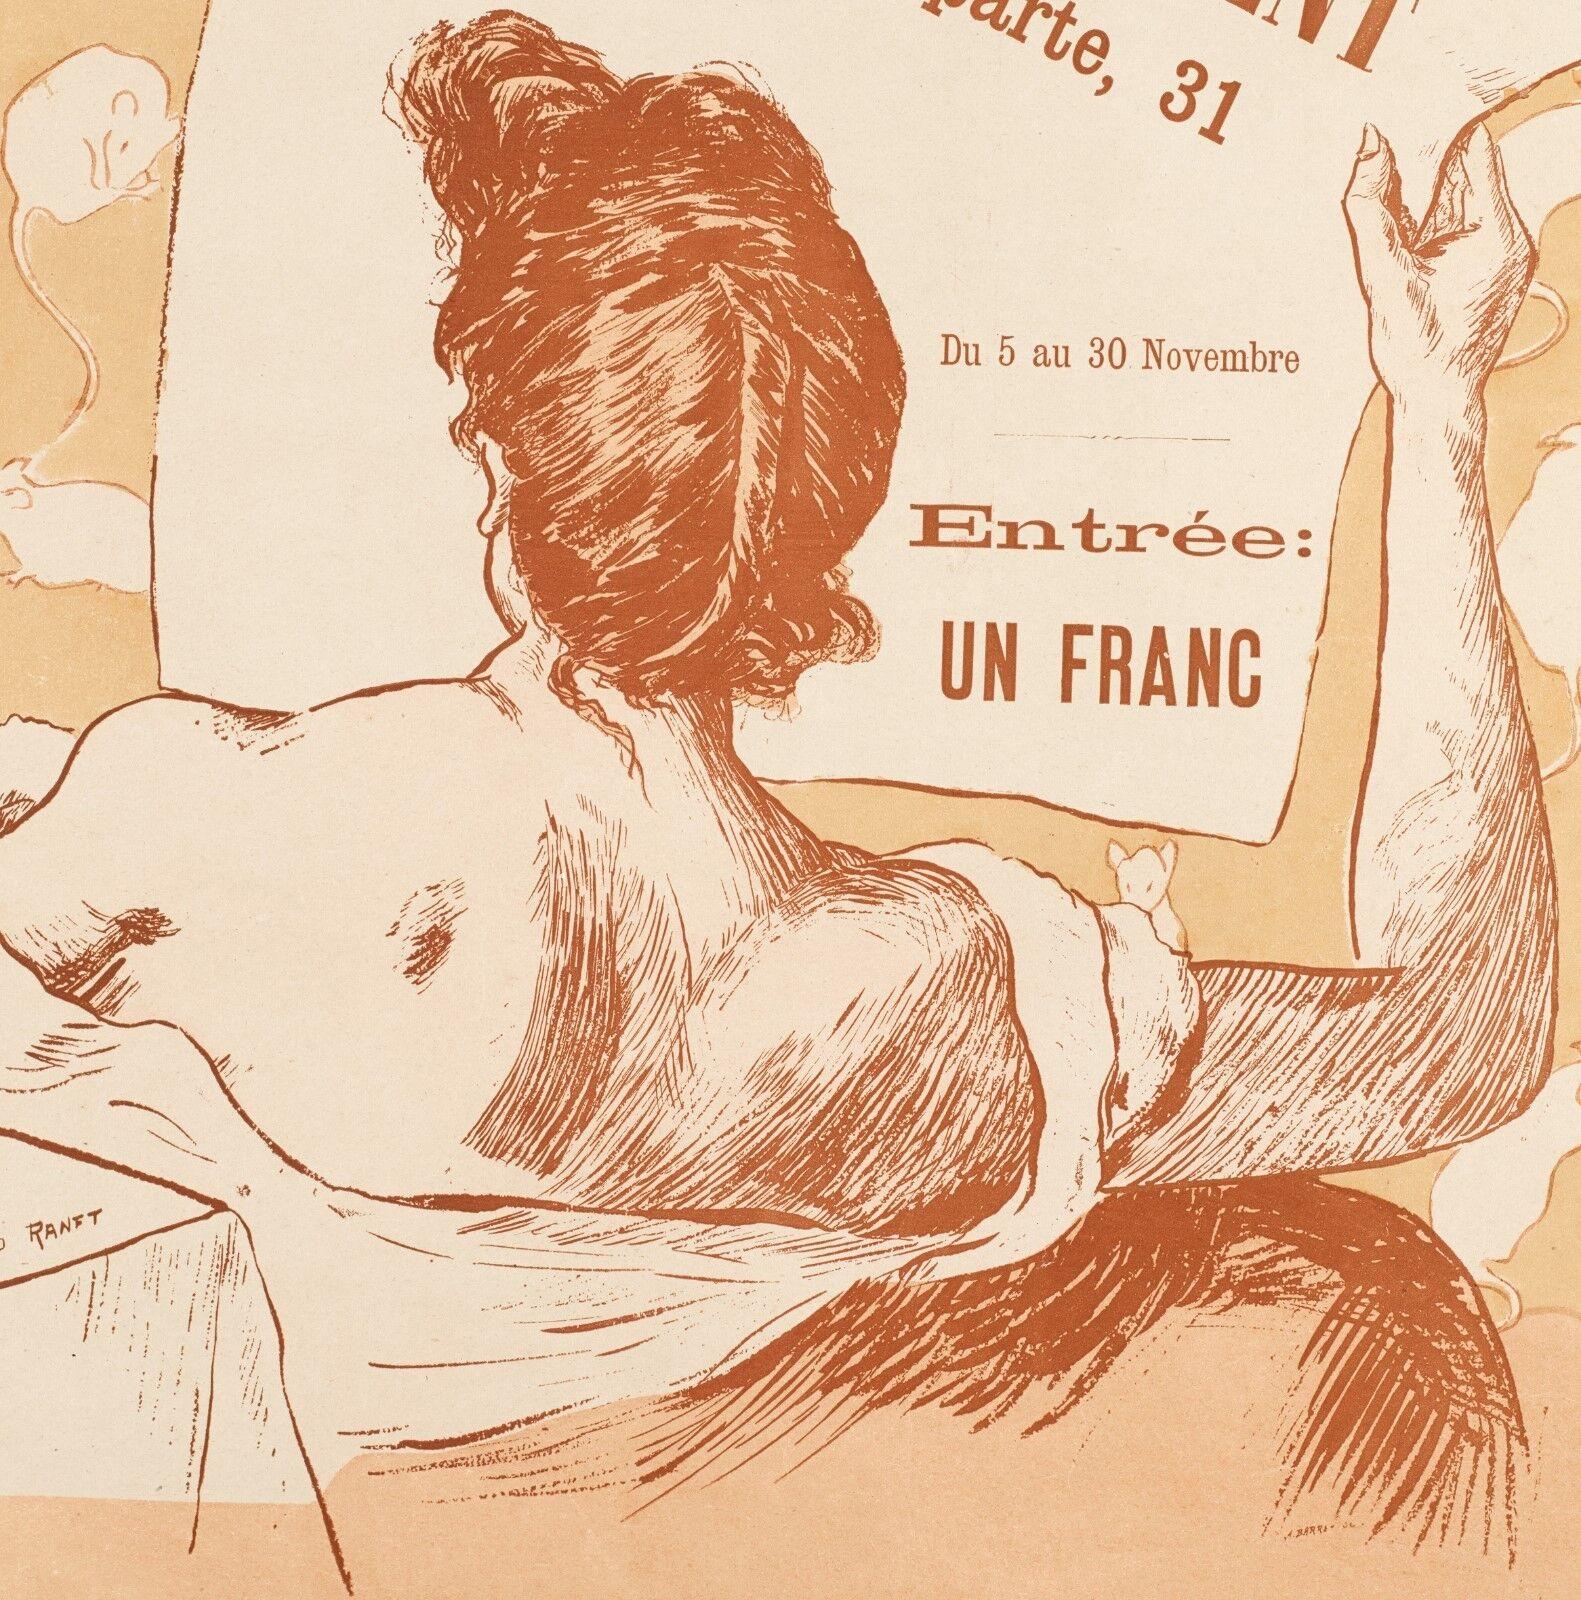 Original Vintage Poster-Richard Ranft-Salon des Cent-The Feather-Mouse, 1894

Poster for the 6th edition of the Salon des Cent in November 1894.

A woman lying on a sofa is reading La Plume newspaper. The interior is decorated with wallpaper with a